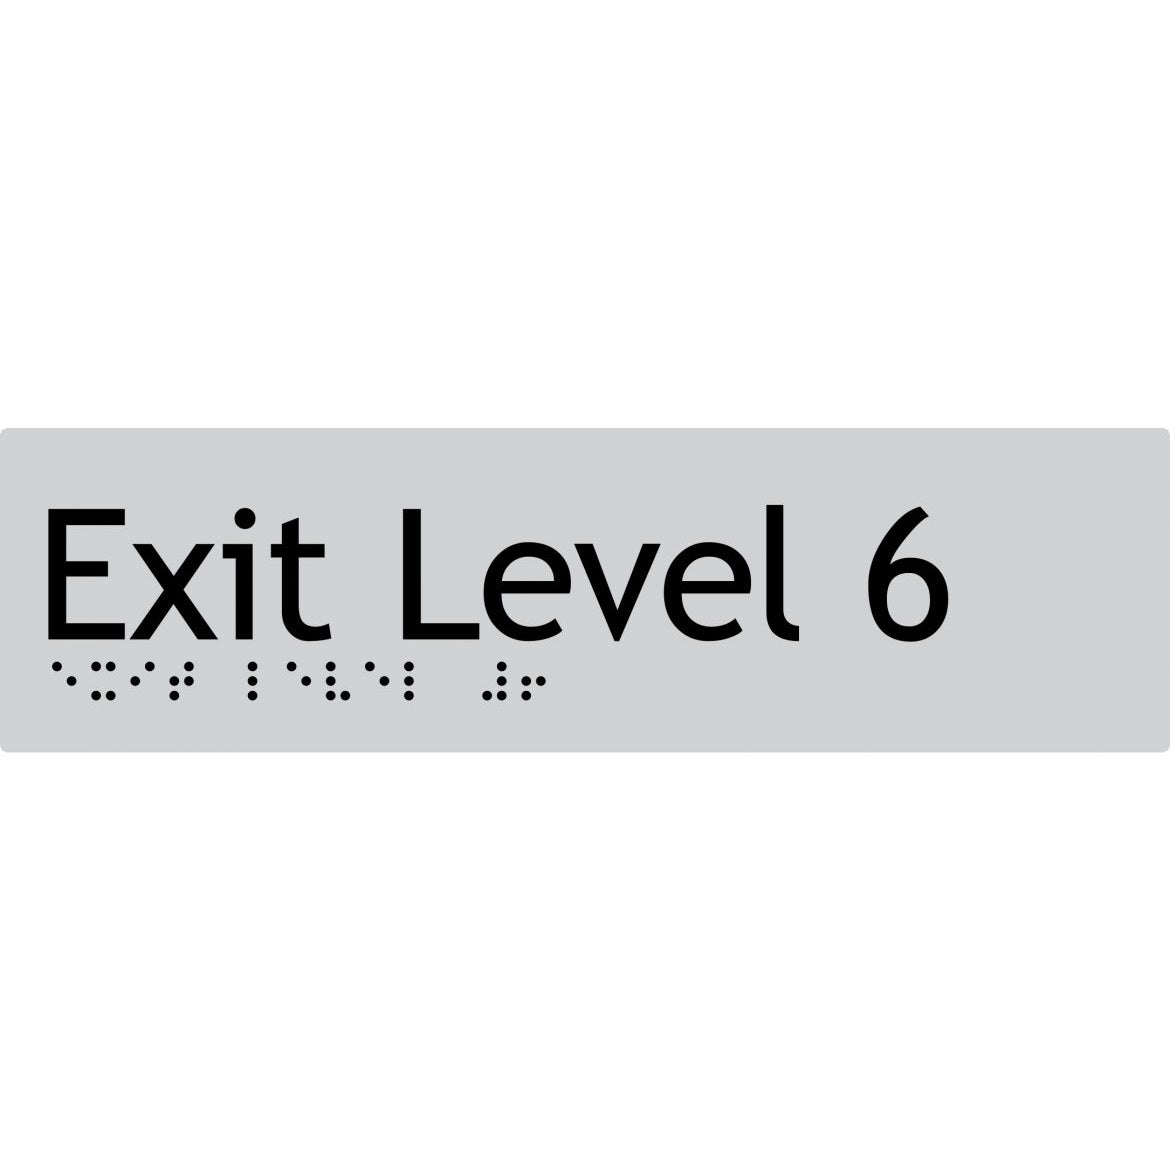 AS1428 Compliant Exit Sign L6 SILVER Level 6 Braille 180x50x3mm